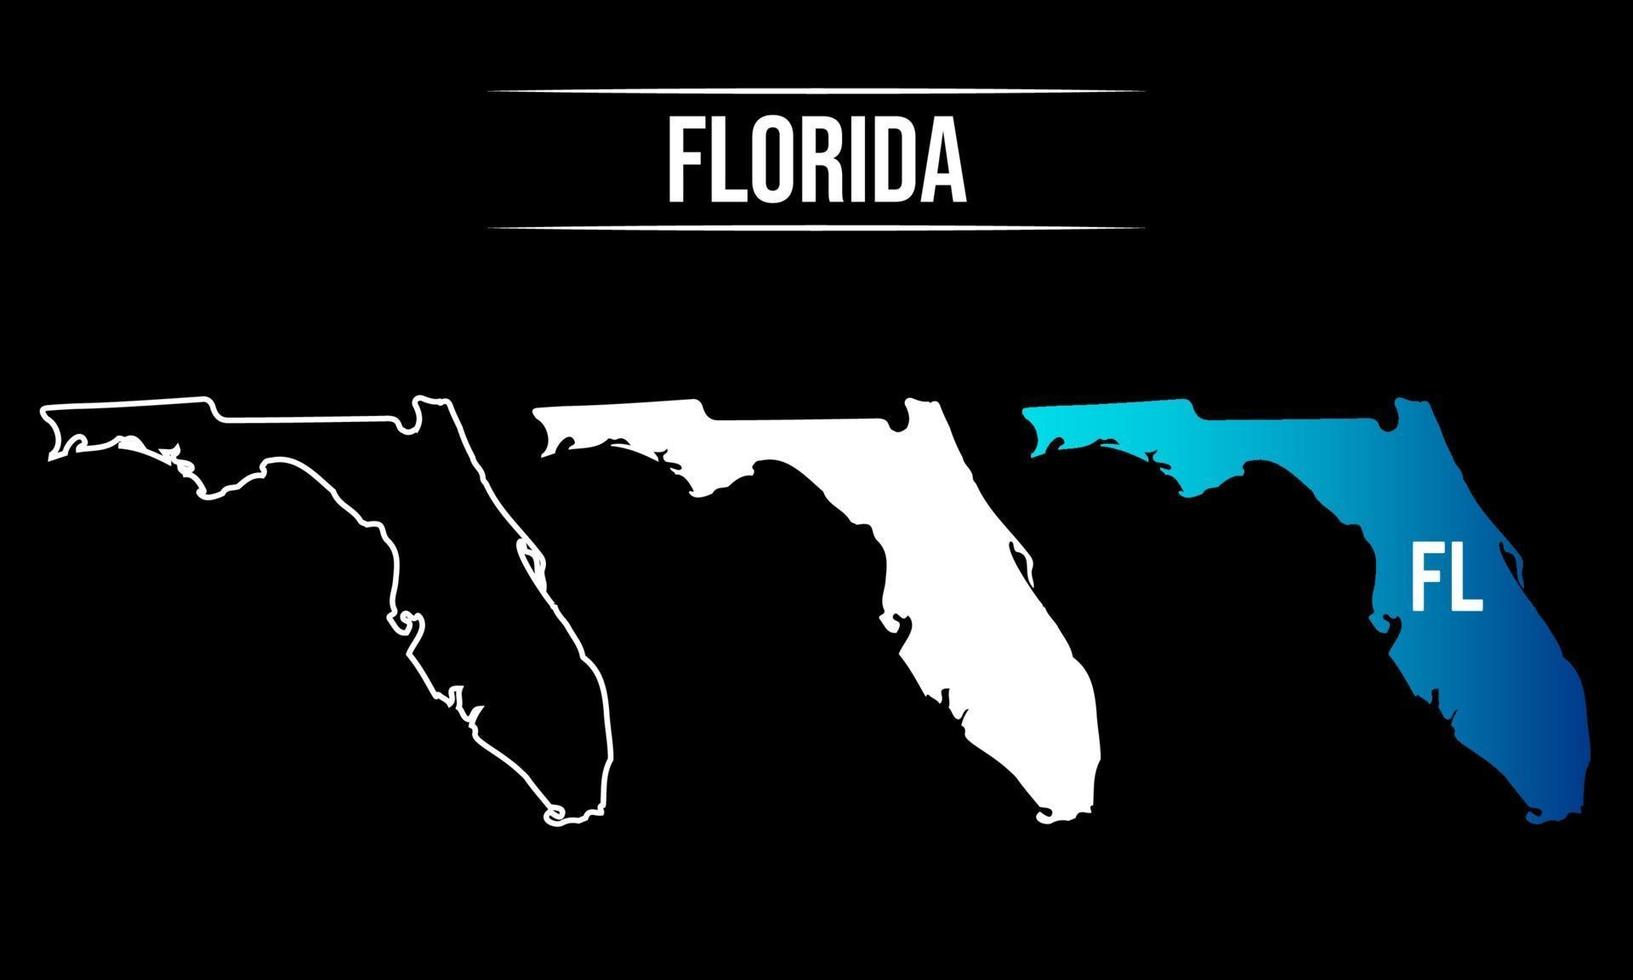 Abstract Florida State Map Design vector